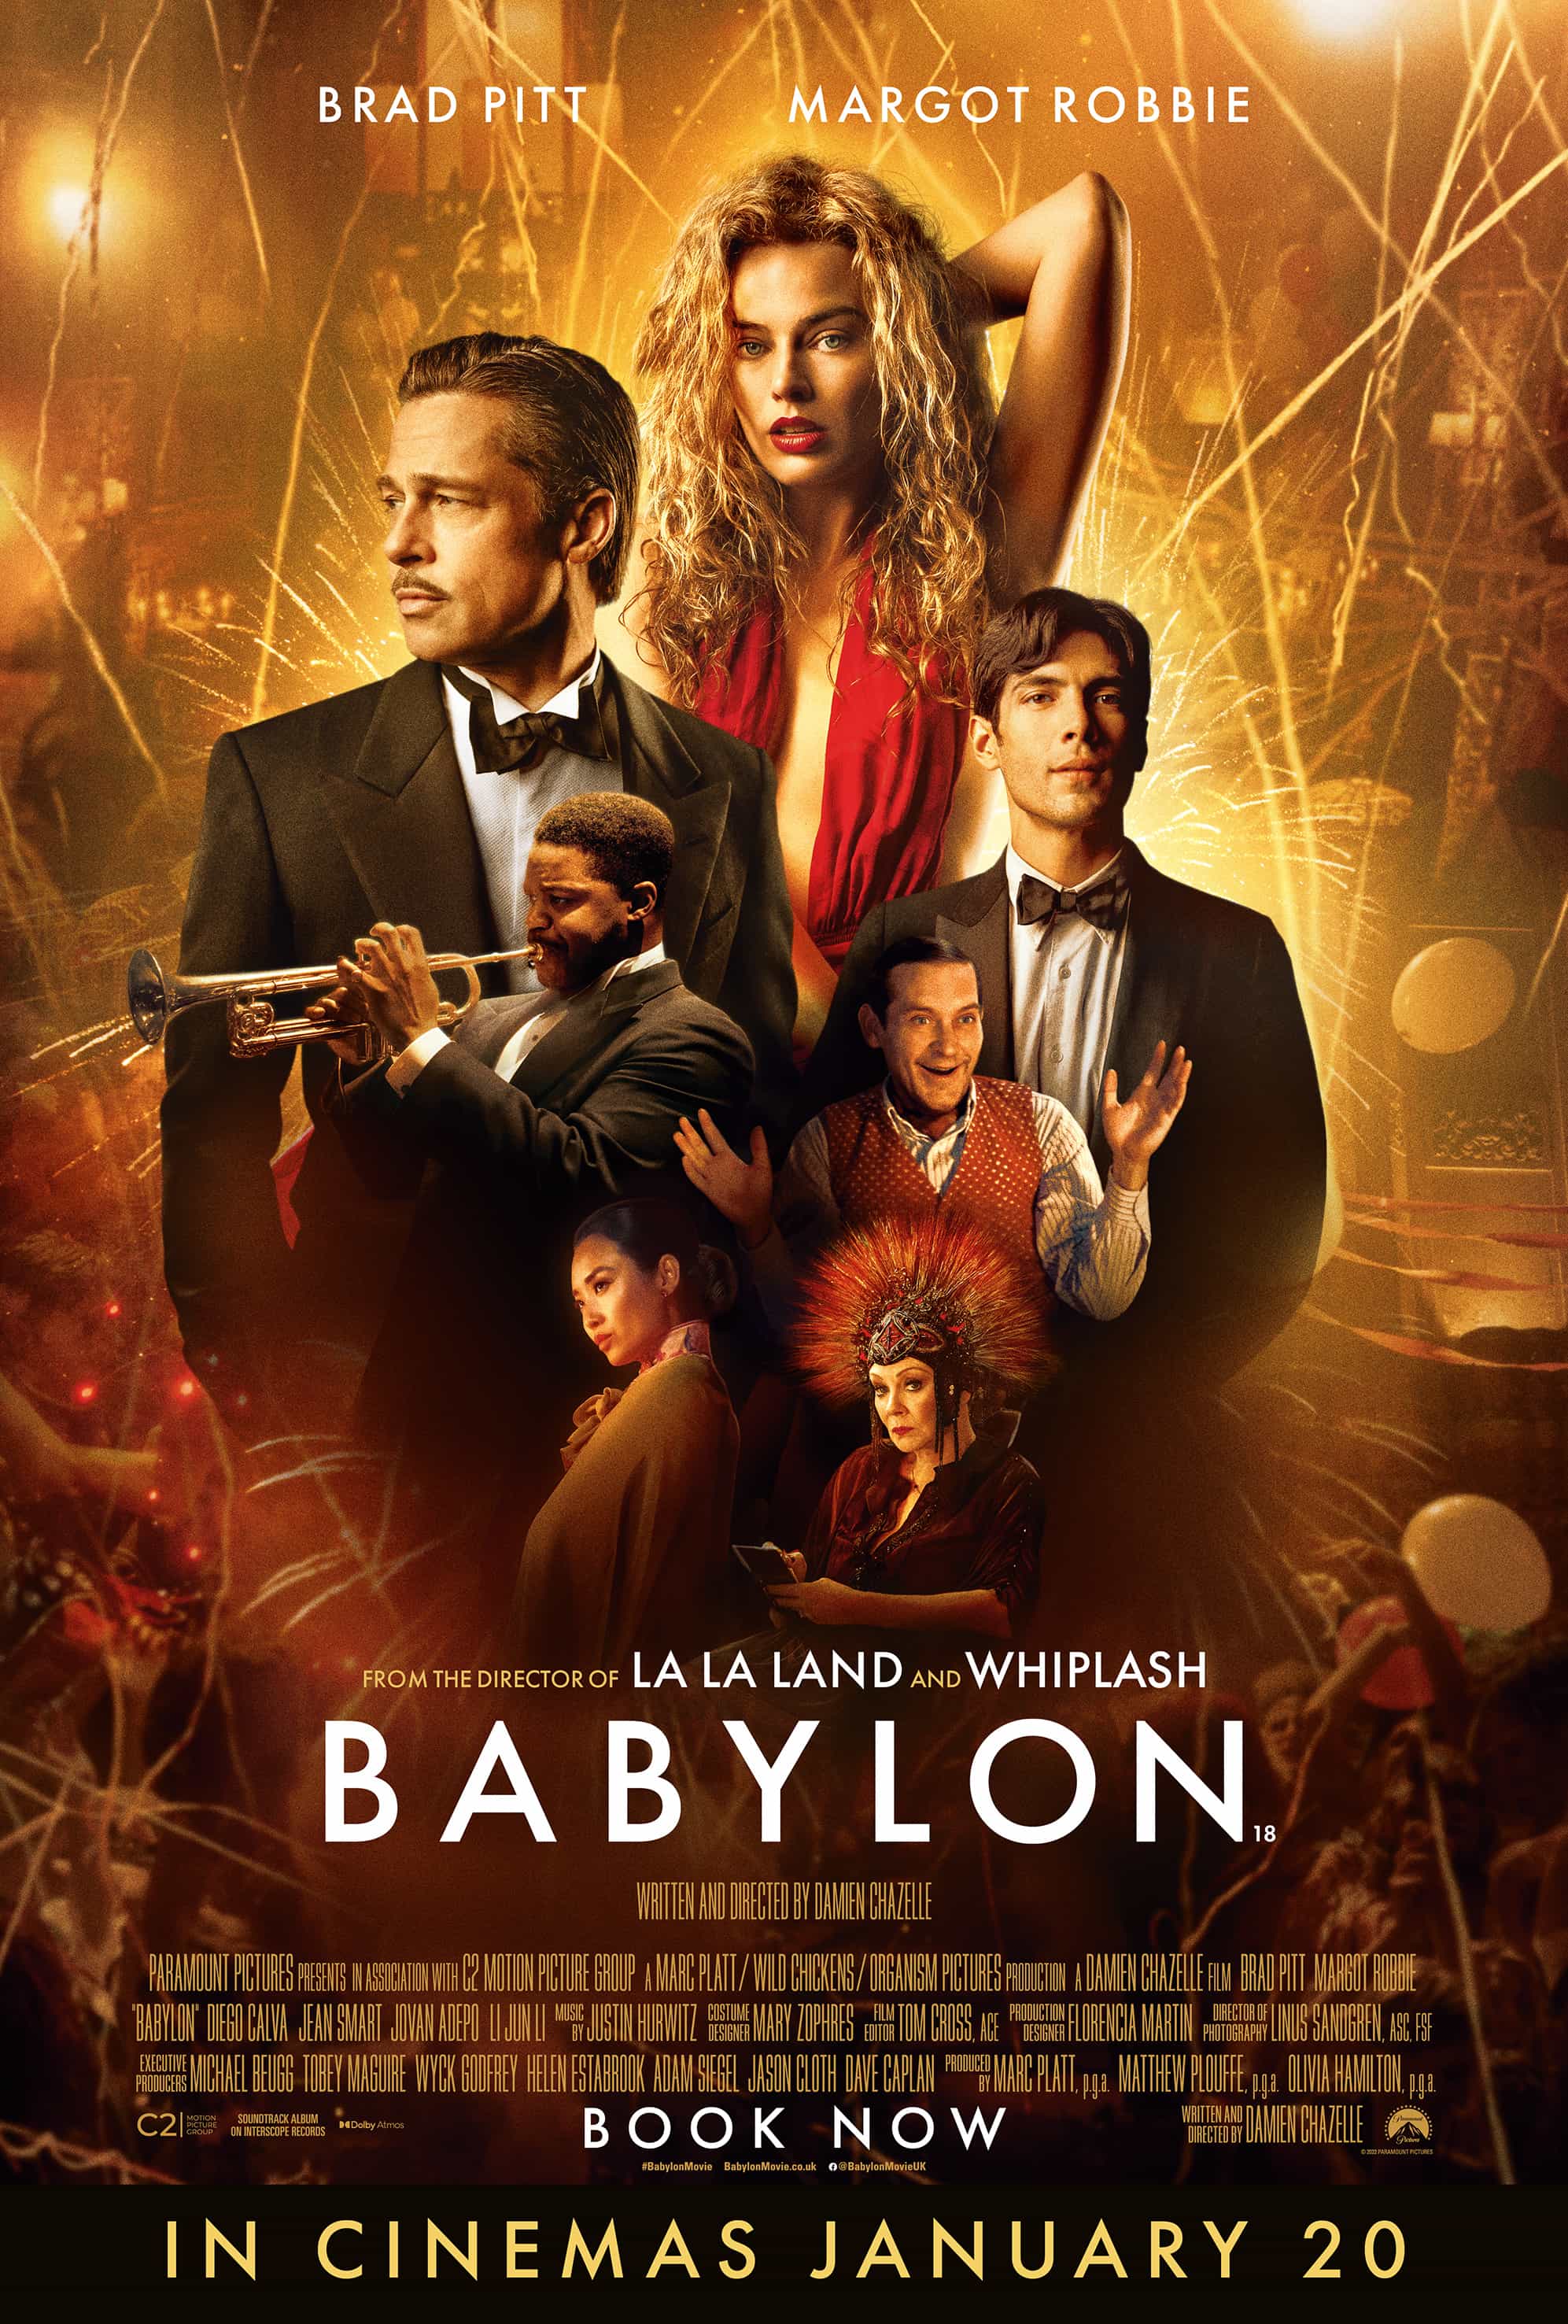 Babylon has been given an 18 age rating in the UK for strong sex, nudity, drug misuse